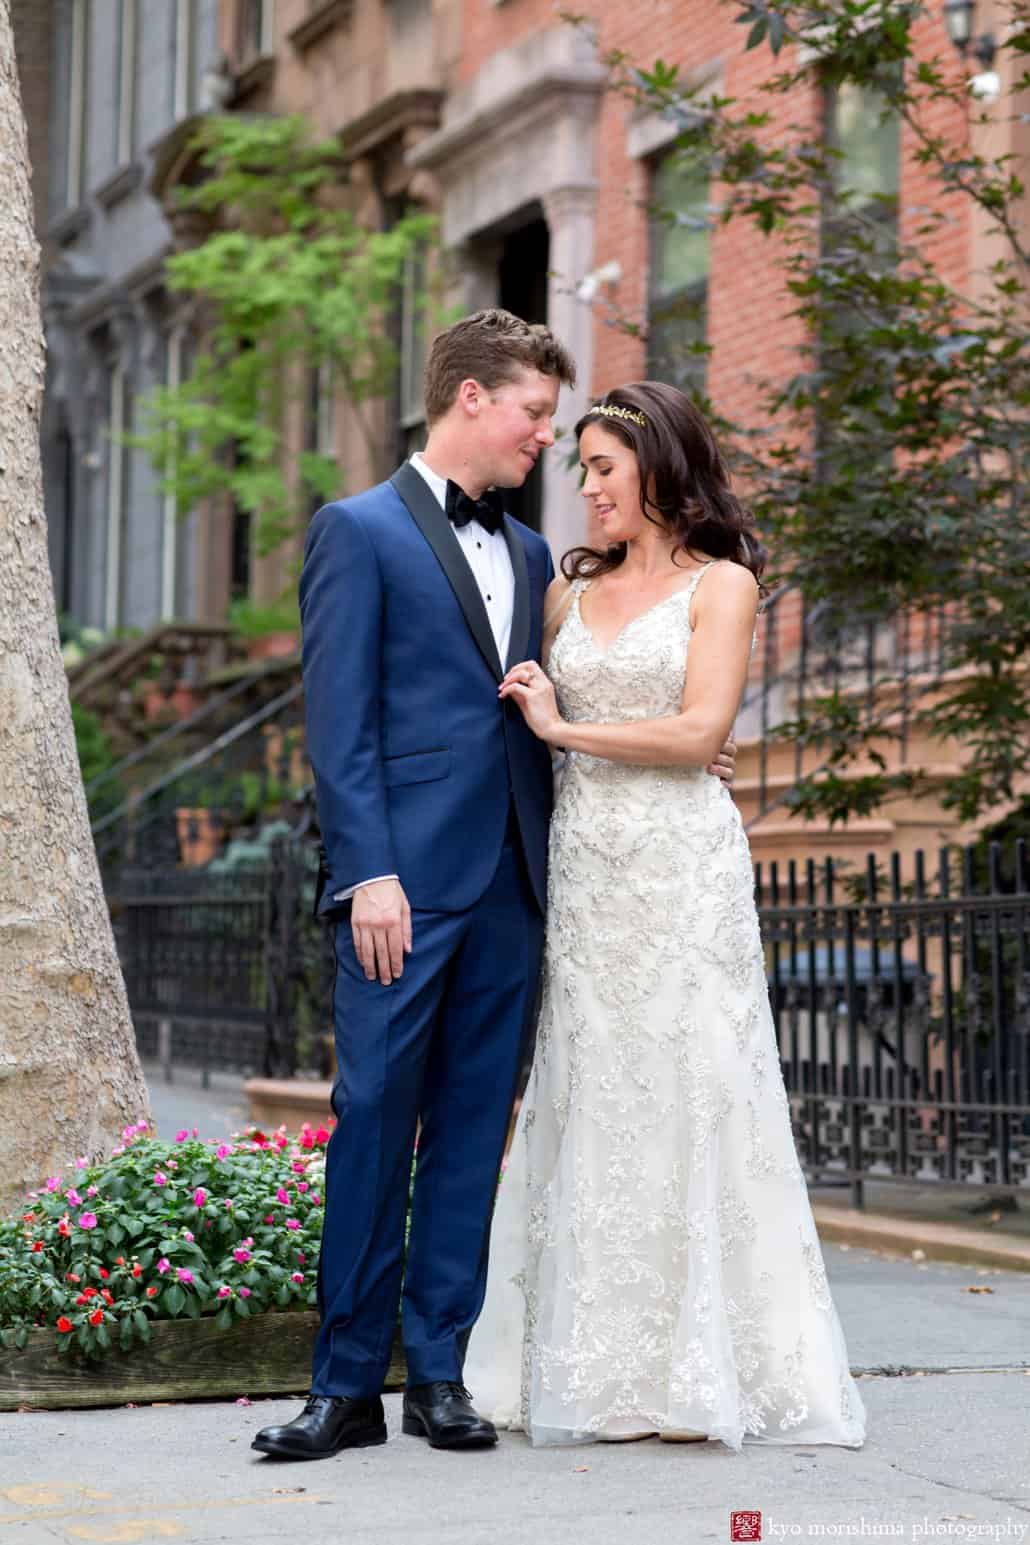 Cobble Hill wedding photo; bride wears Maggie Sottero and groom wears Ted Baker; photographed by Brooklyn wedding photographer Kyo Morishima